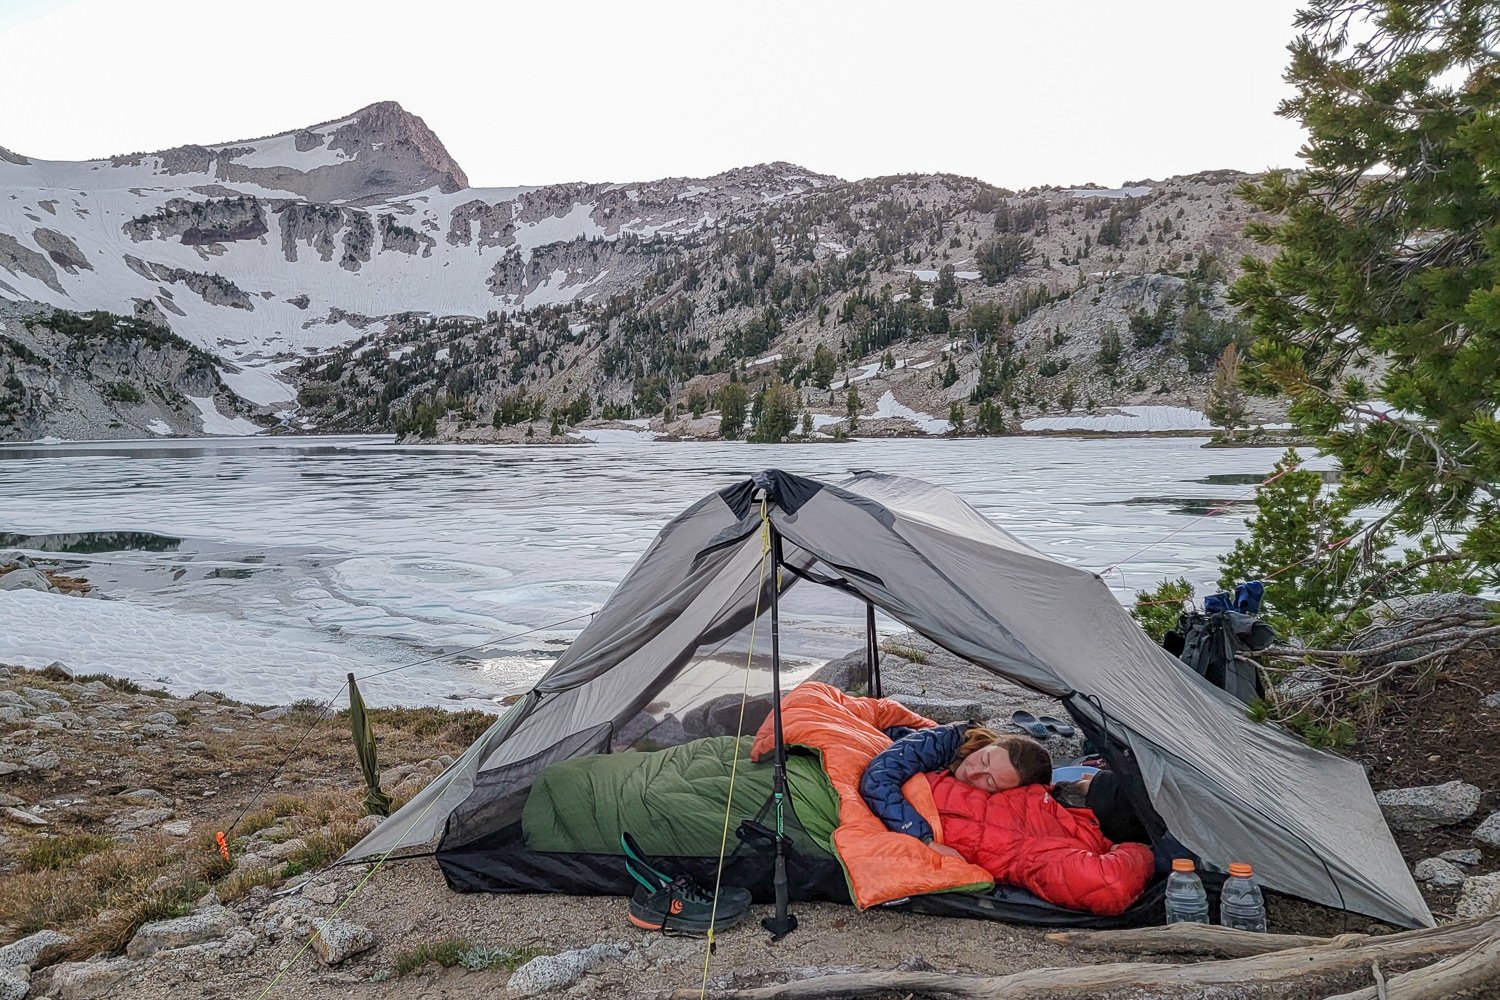 A couple using the Enlightened Equipment Accomplice 20 Quilt while backpacking